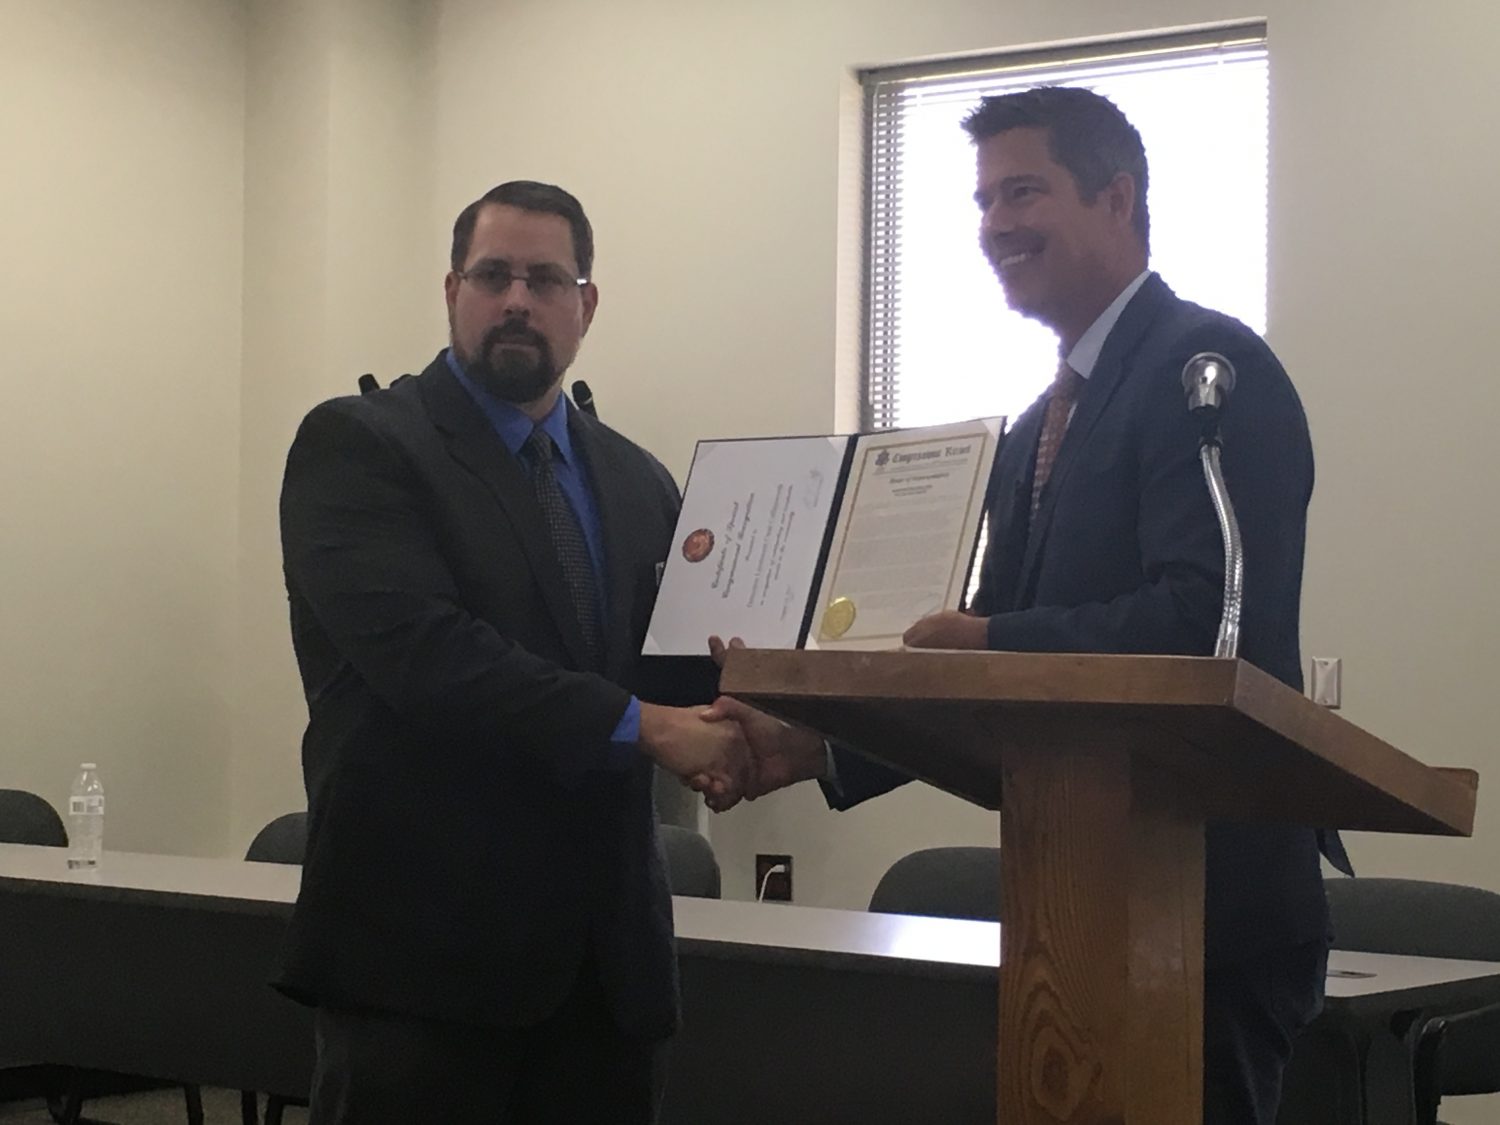 Video: Rep. Duffy honors Sheriff’s Office and Lt. Investigator Collinsworth for efforts in drug interdiction